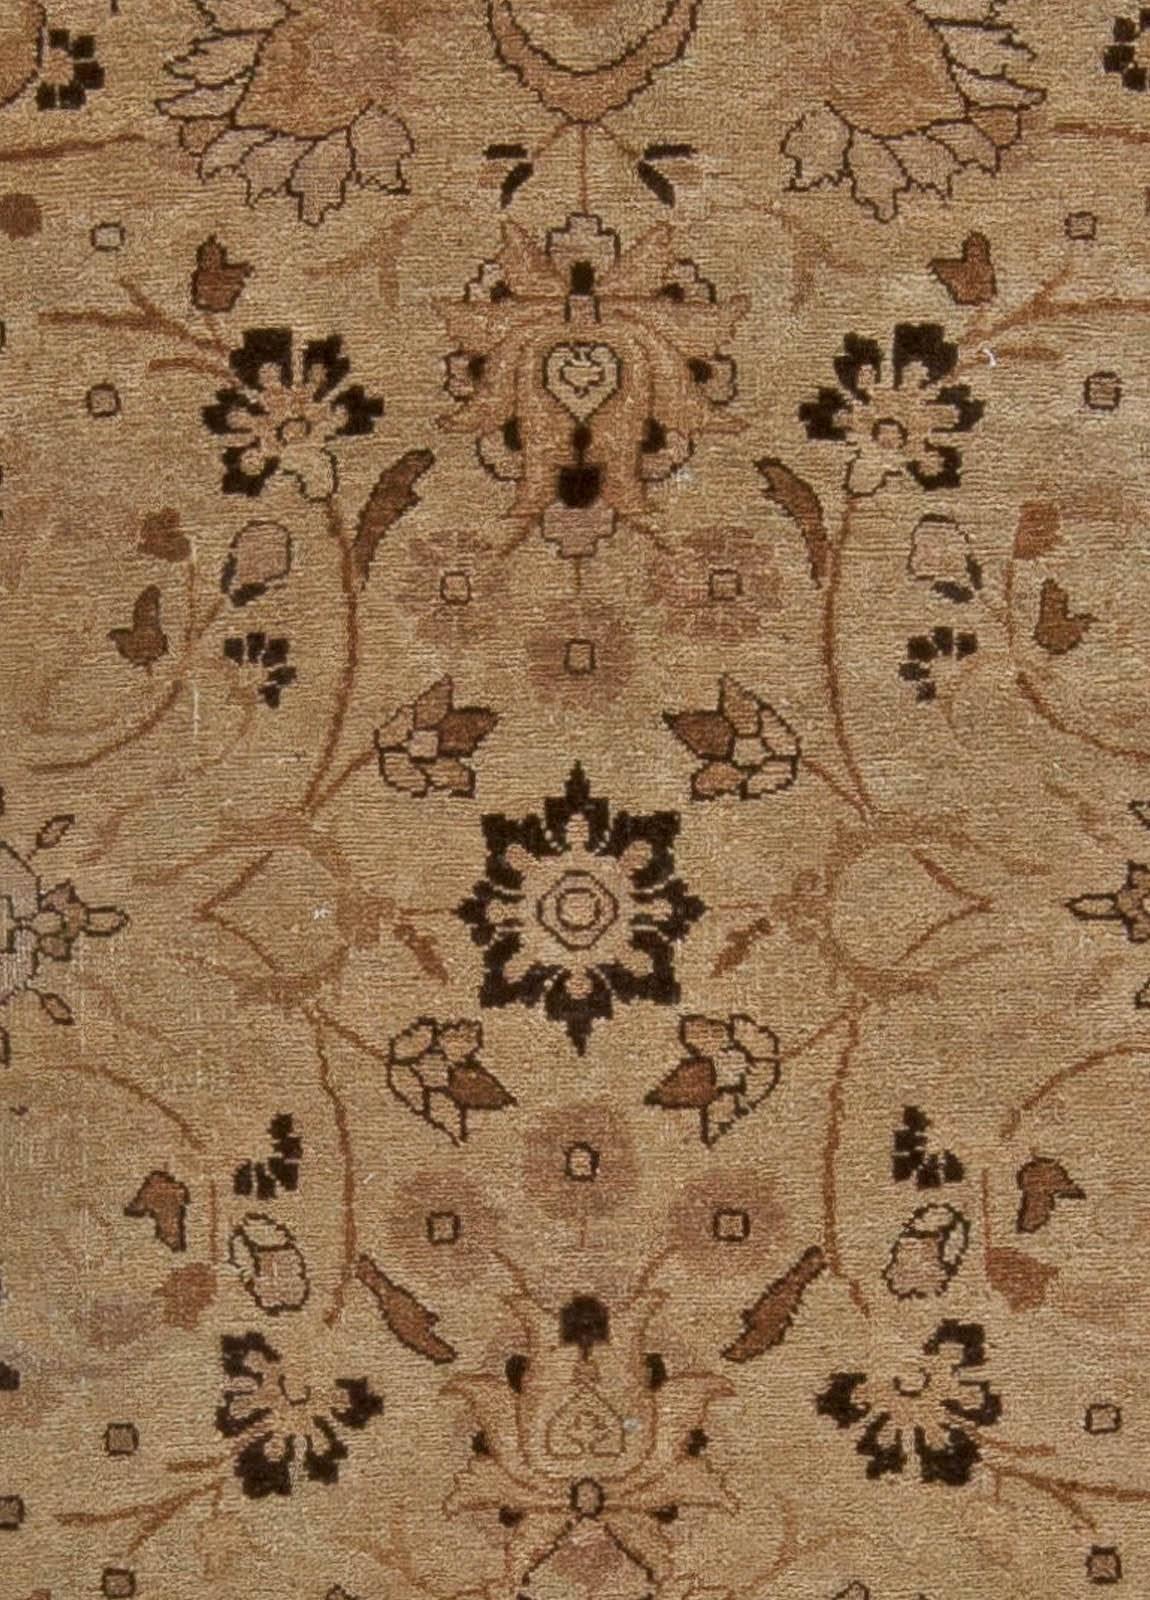 Antique Persian Tabriz beige and brown handwoven wool rug
Size: 7'0